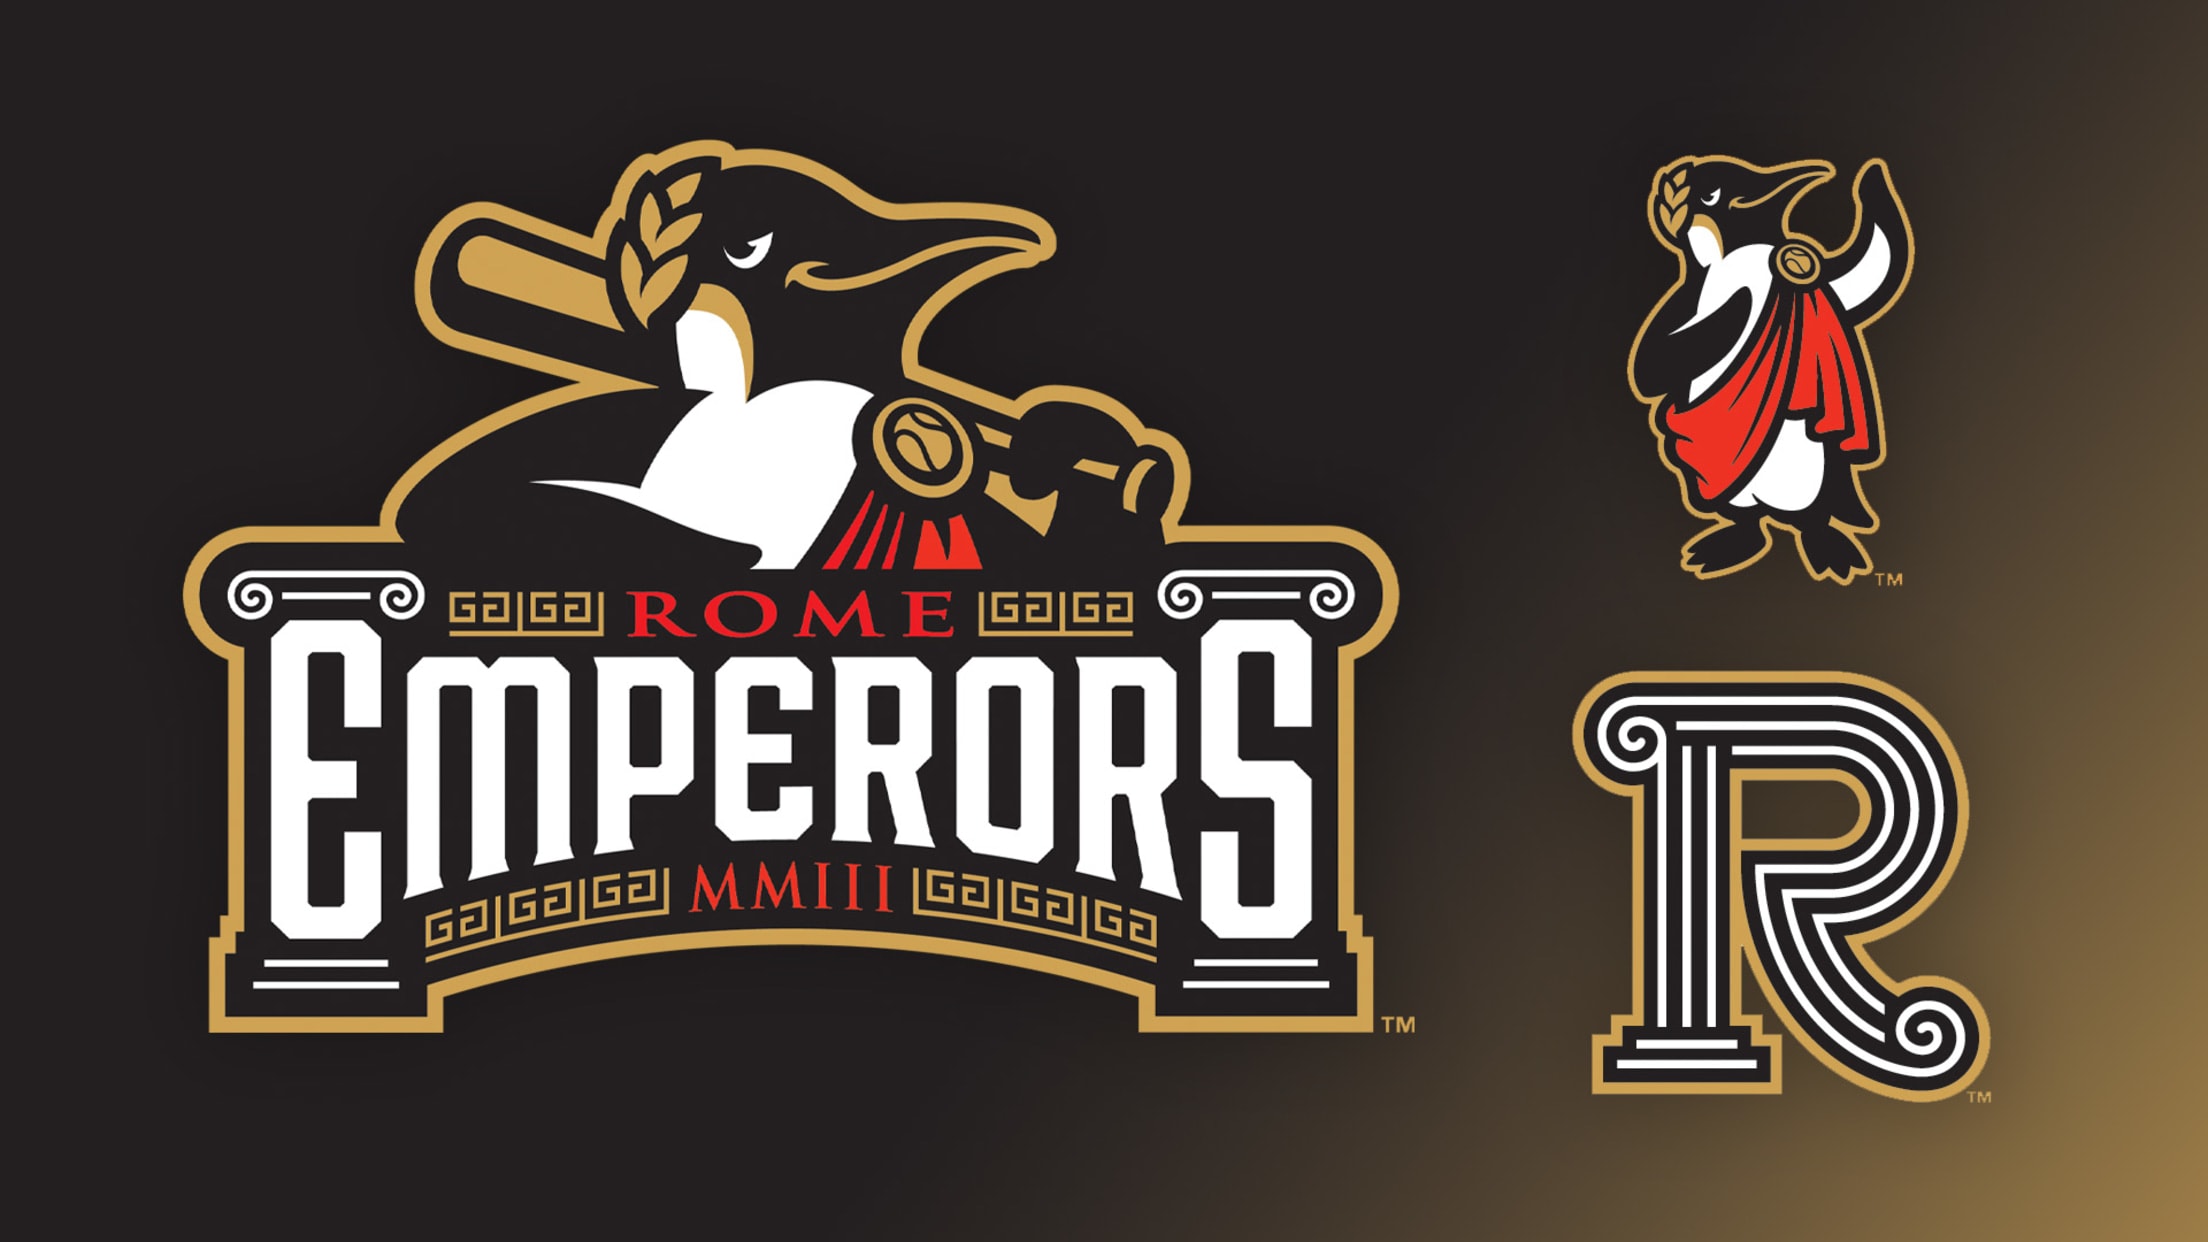 The logos for the Rome Emperors Minor League team